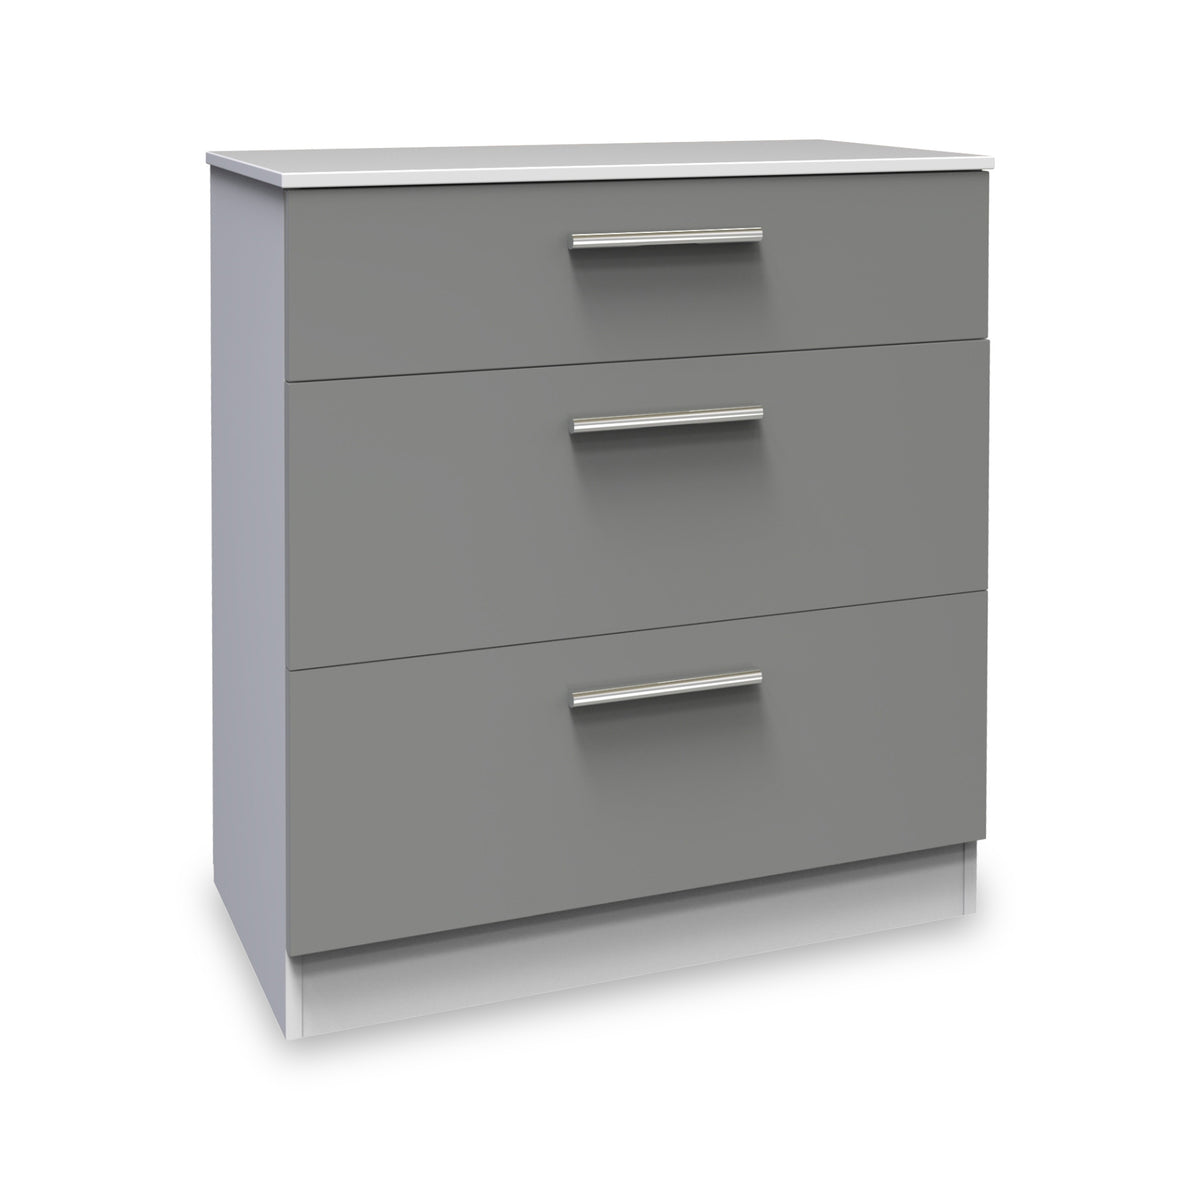 Blakely Grey and White 3 Drawer Deep Chest from Roseland